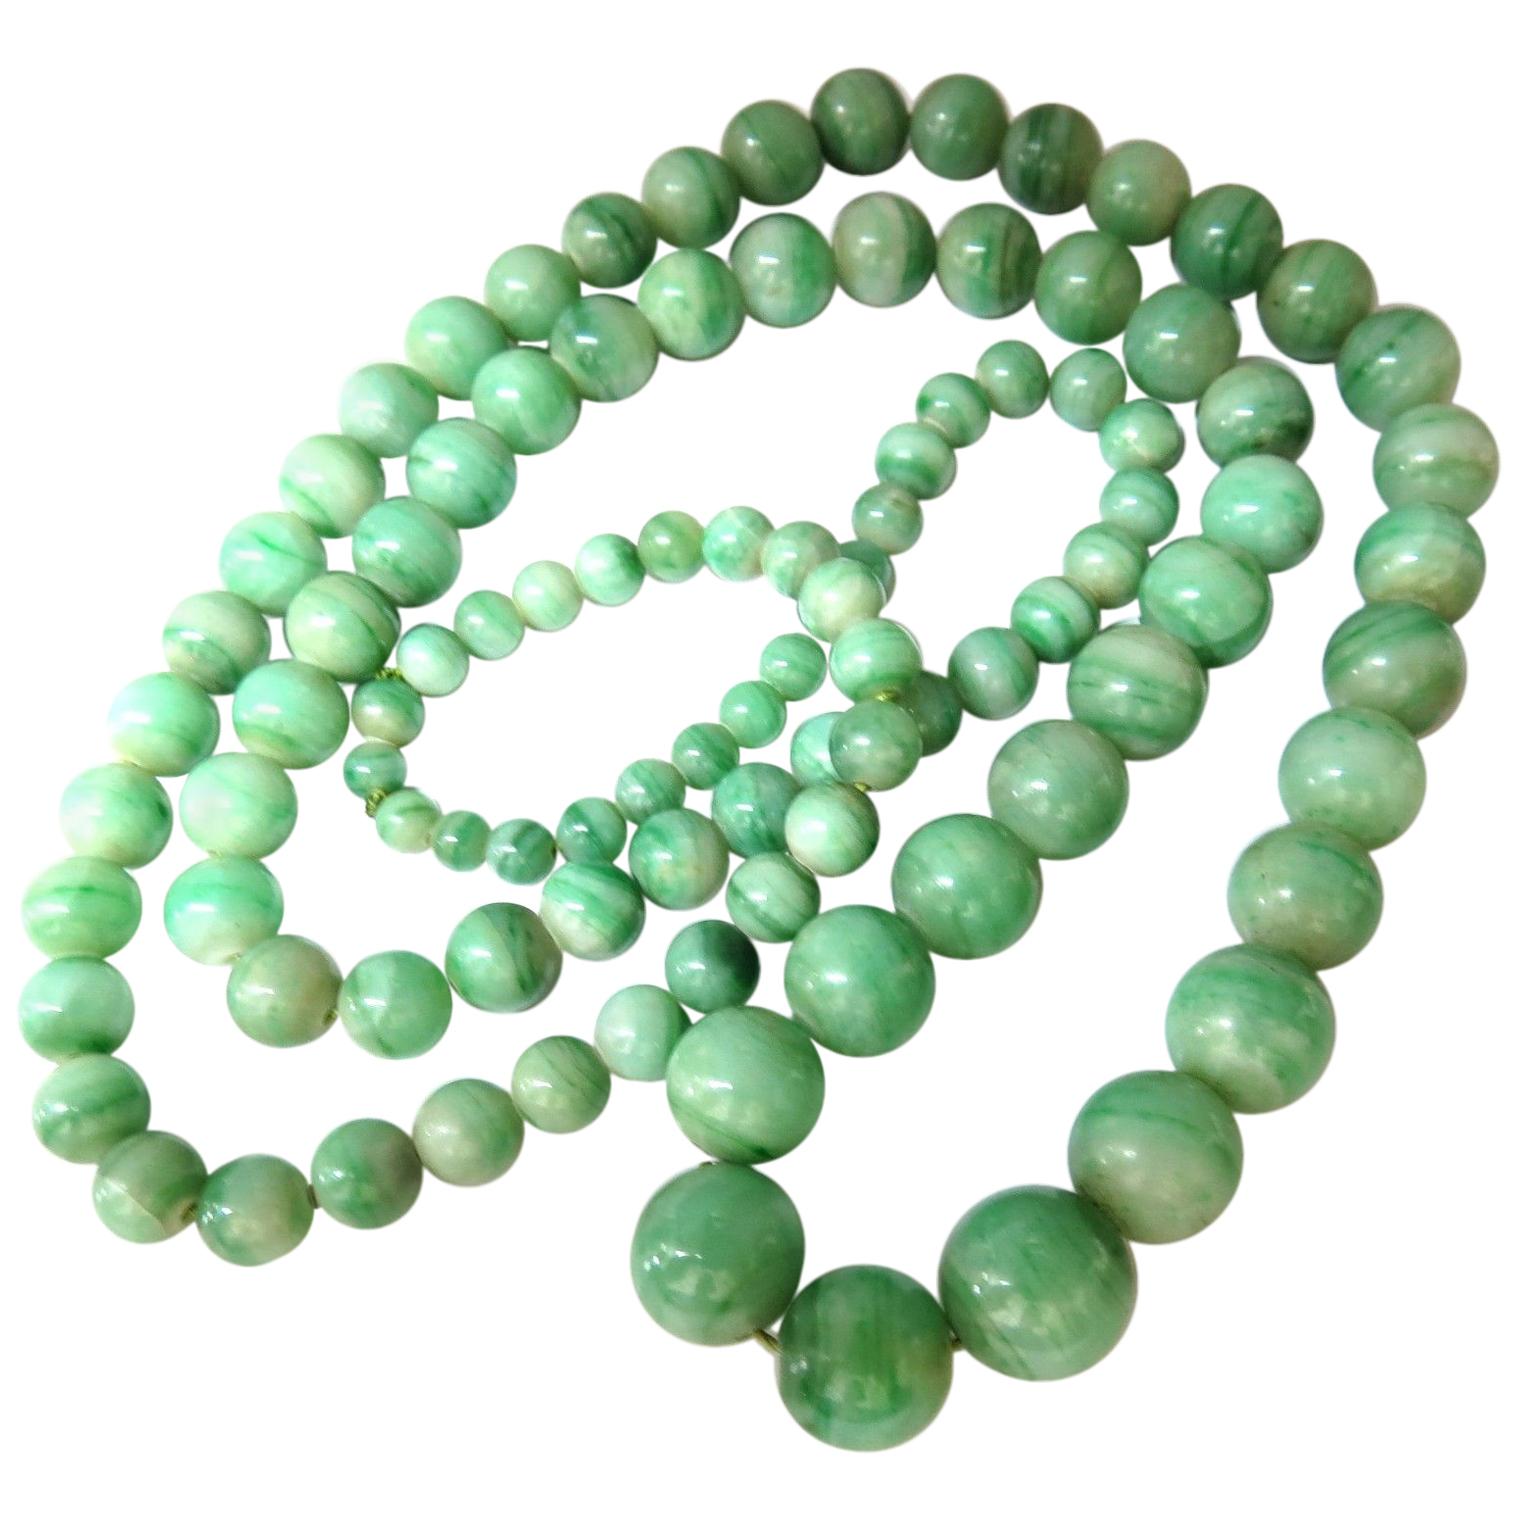 Details about   Natural 100% Chinese Icy Light Green Jadeite Jade 8MM Beads Necklace 